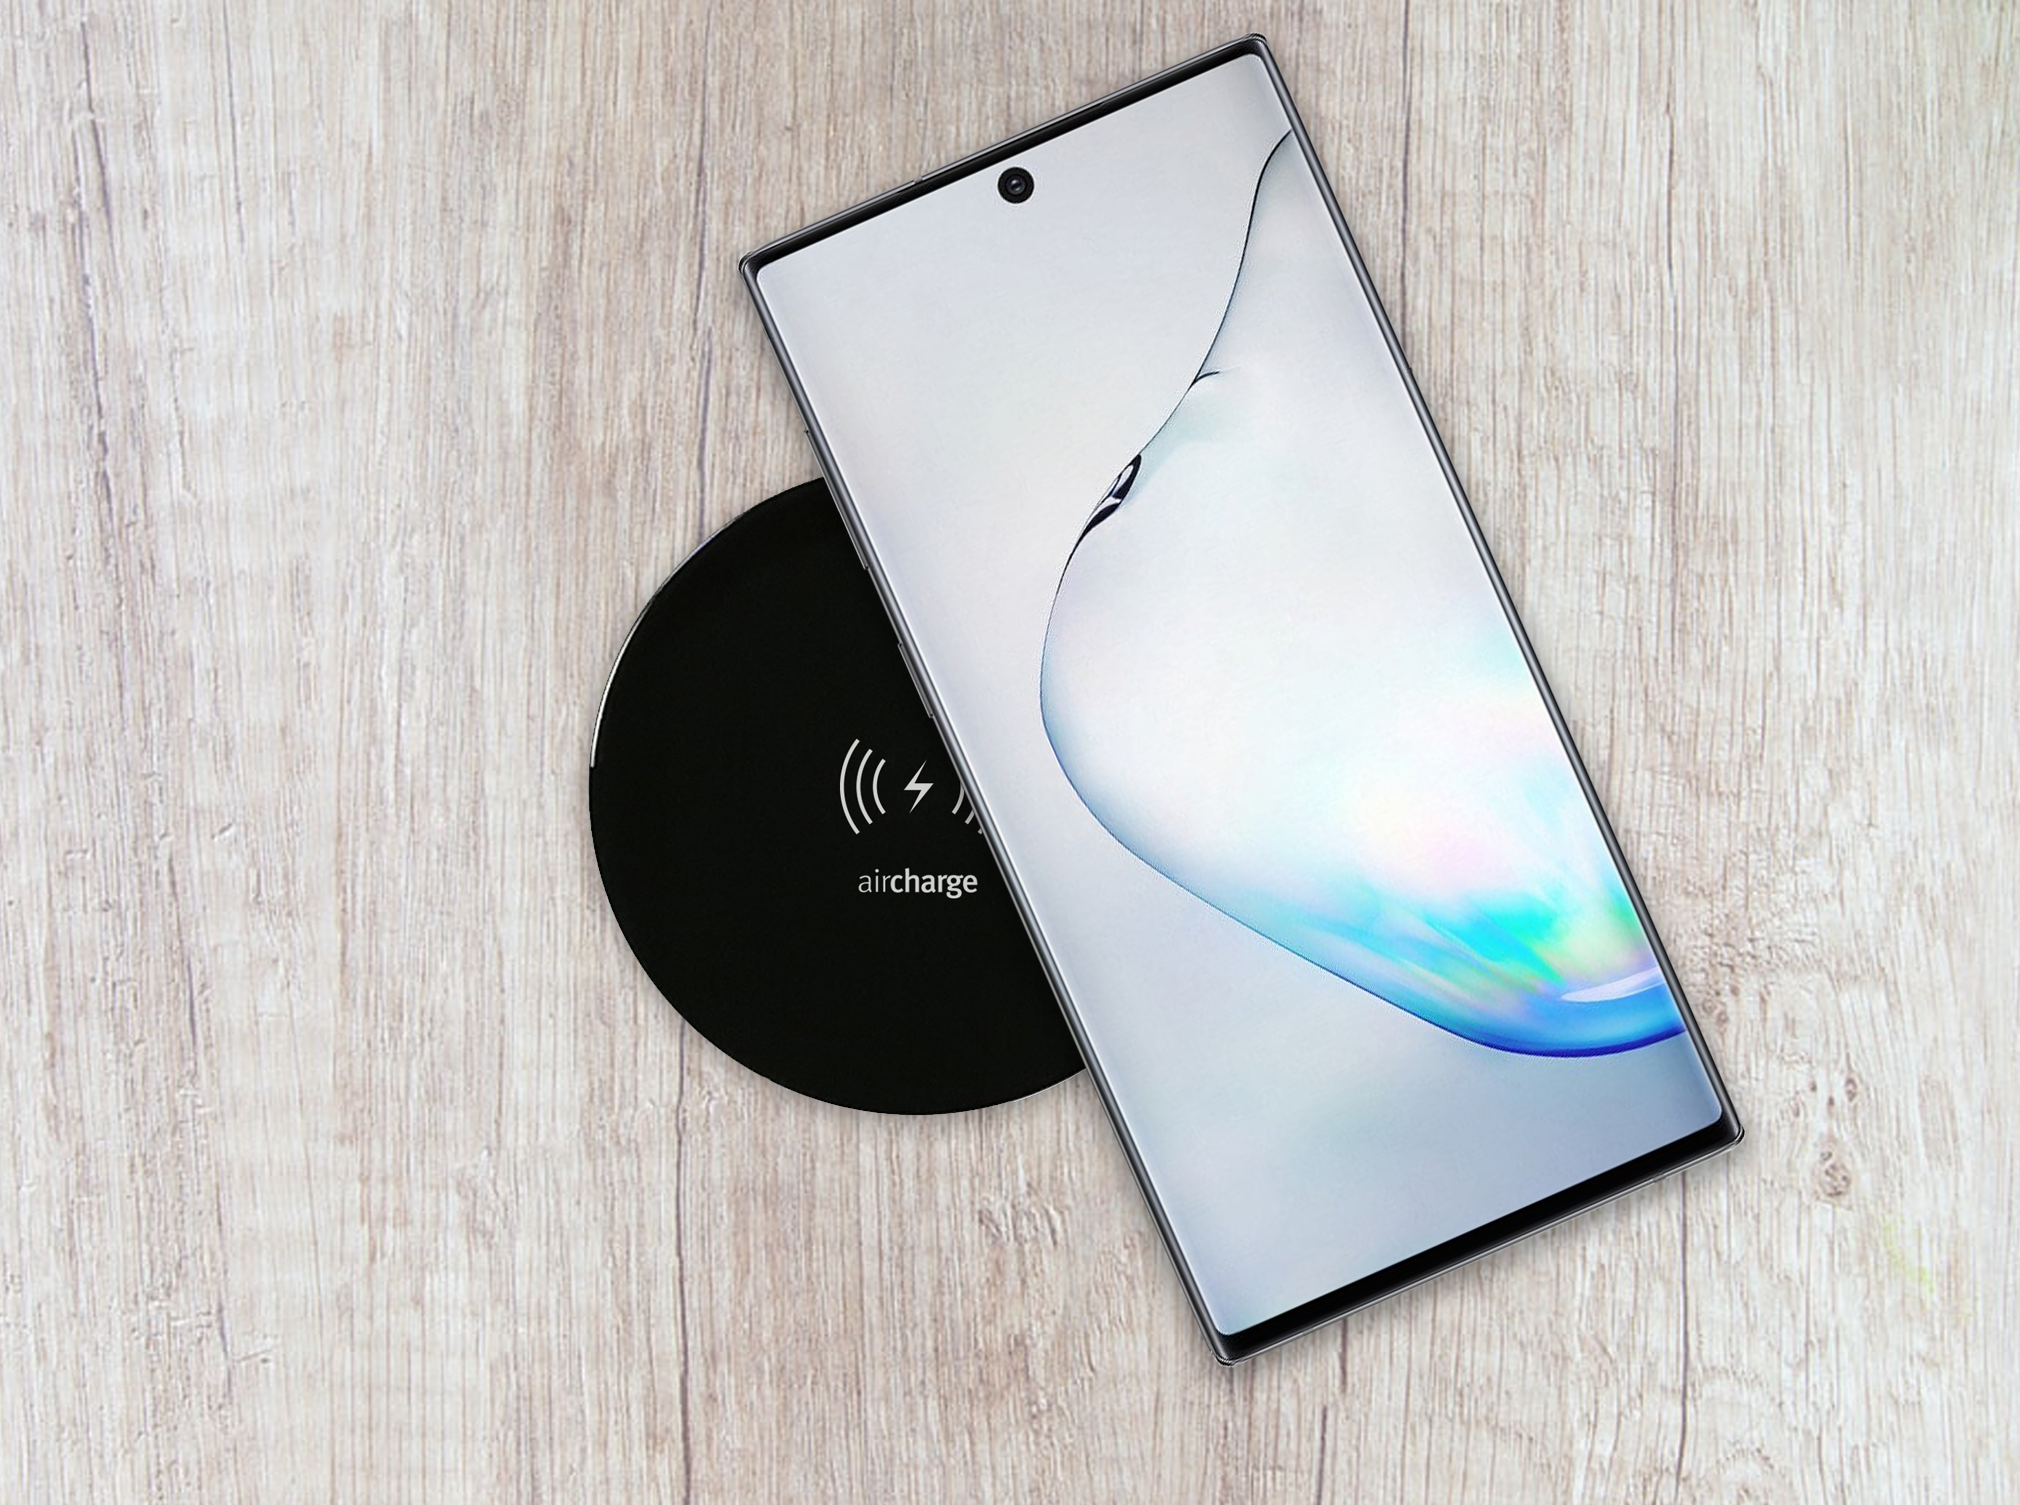 Aircharge | Samsung Galaxy Note 10 and 10+ announced with Qi